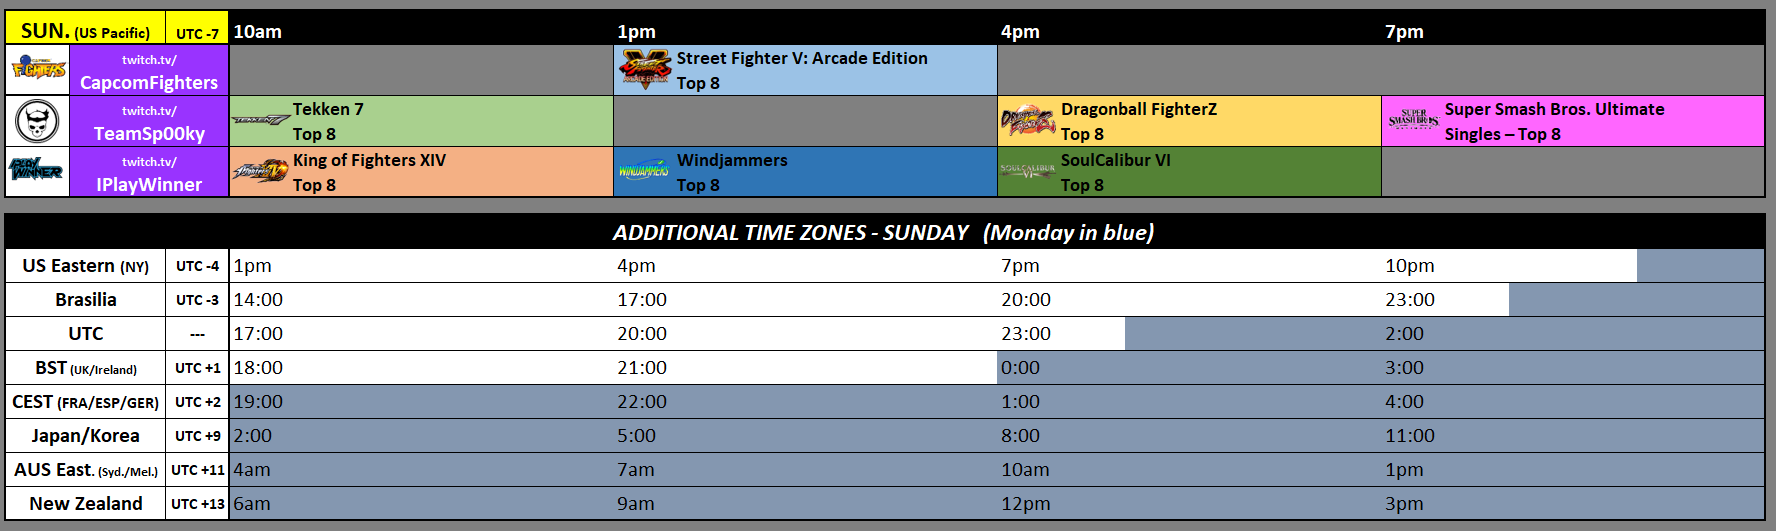 28_ncr2019schedule03.png